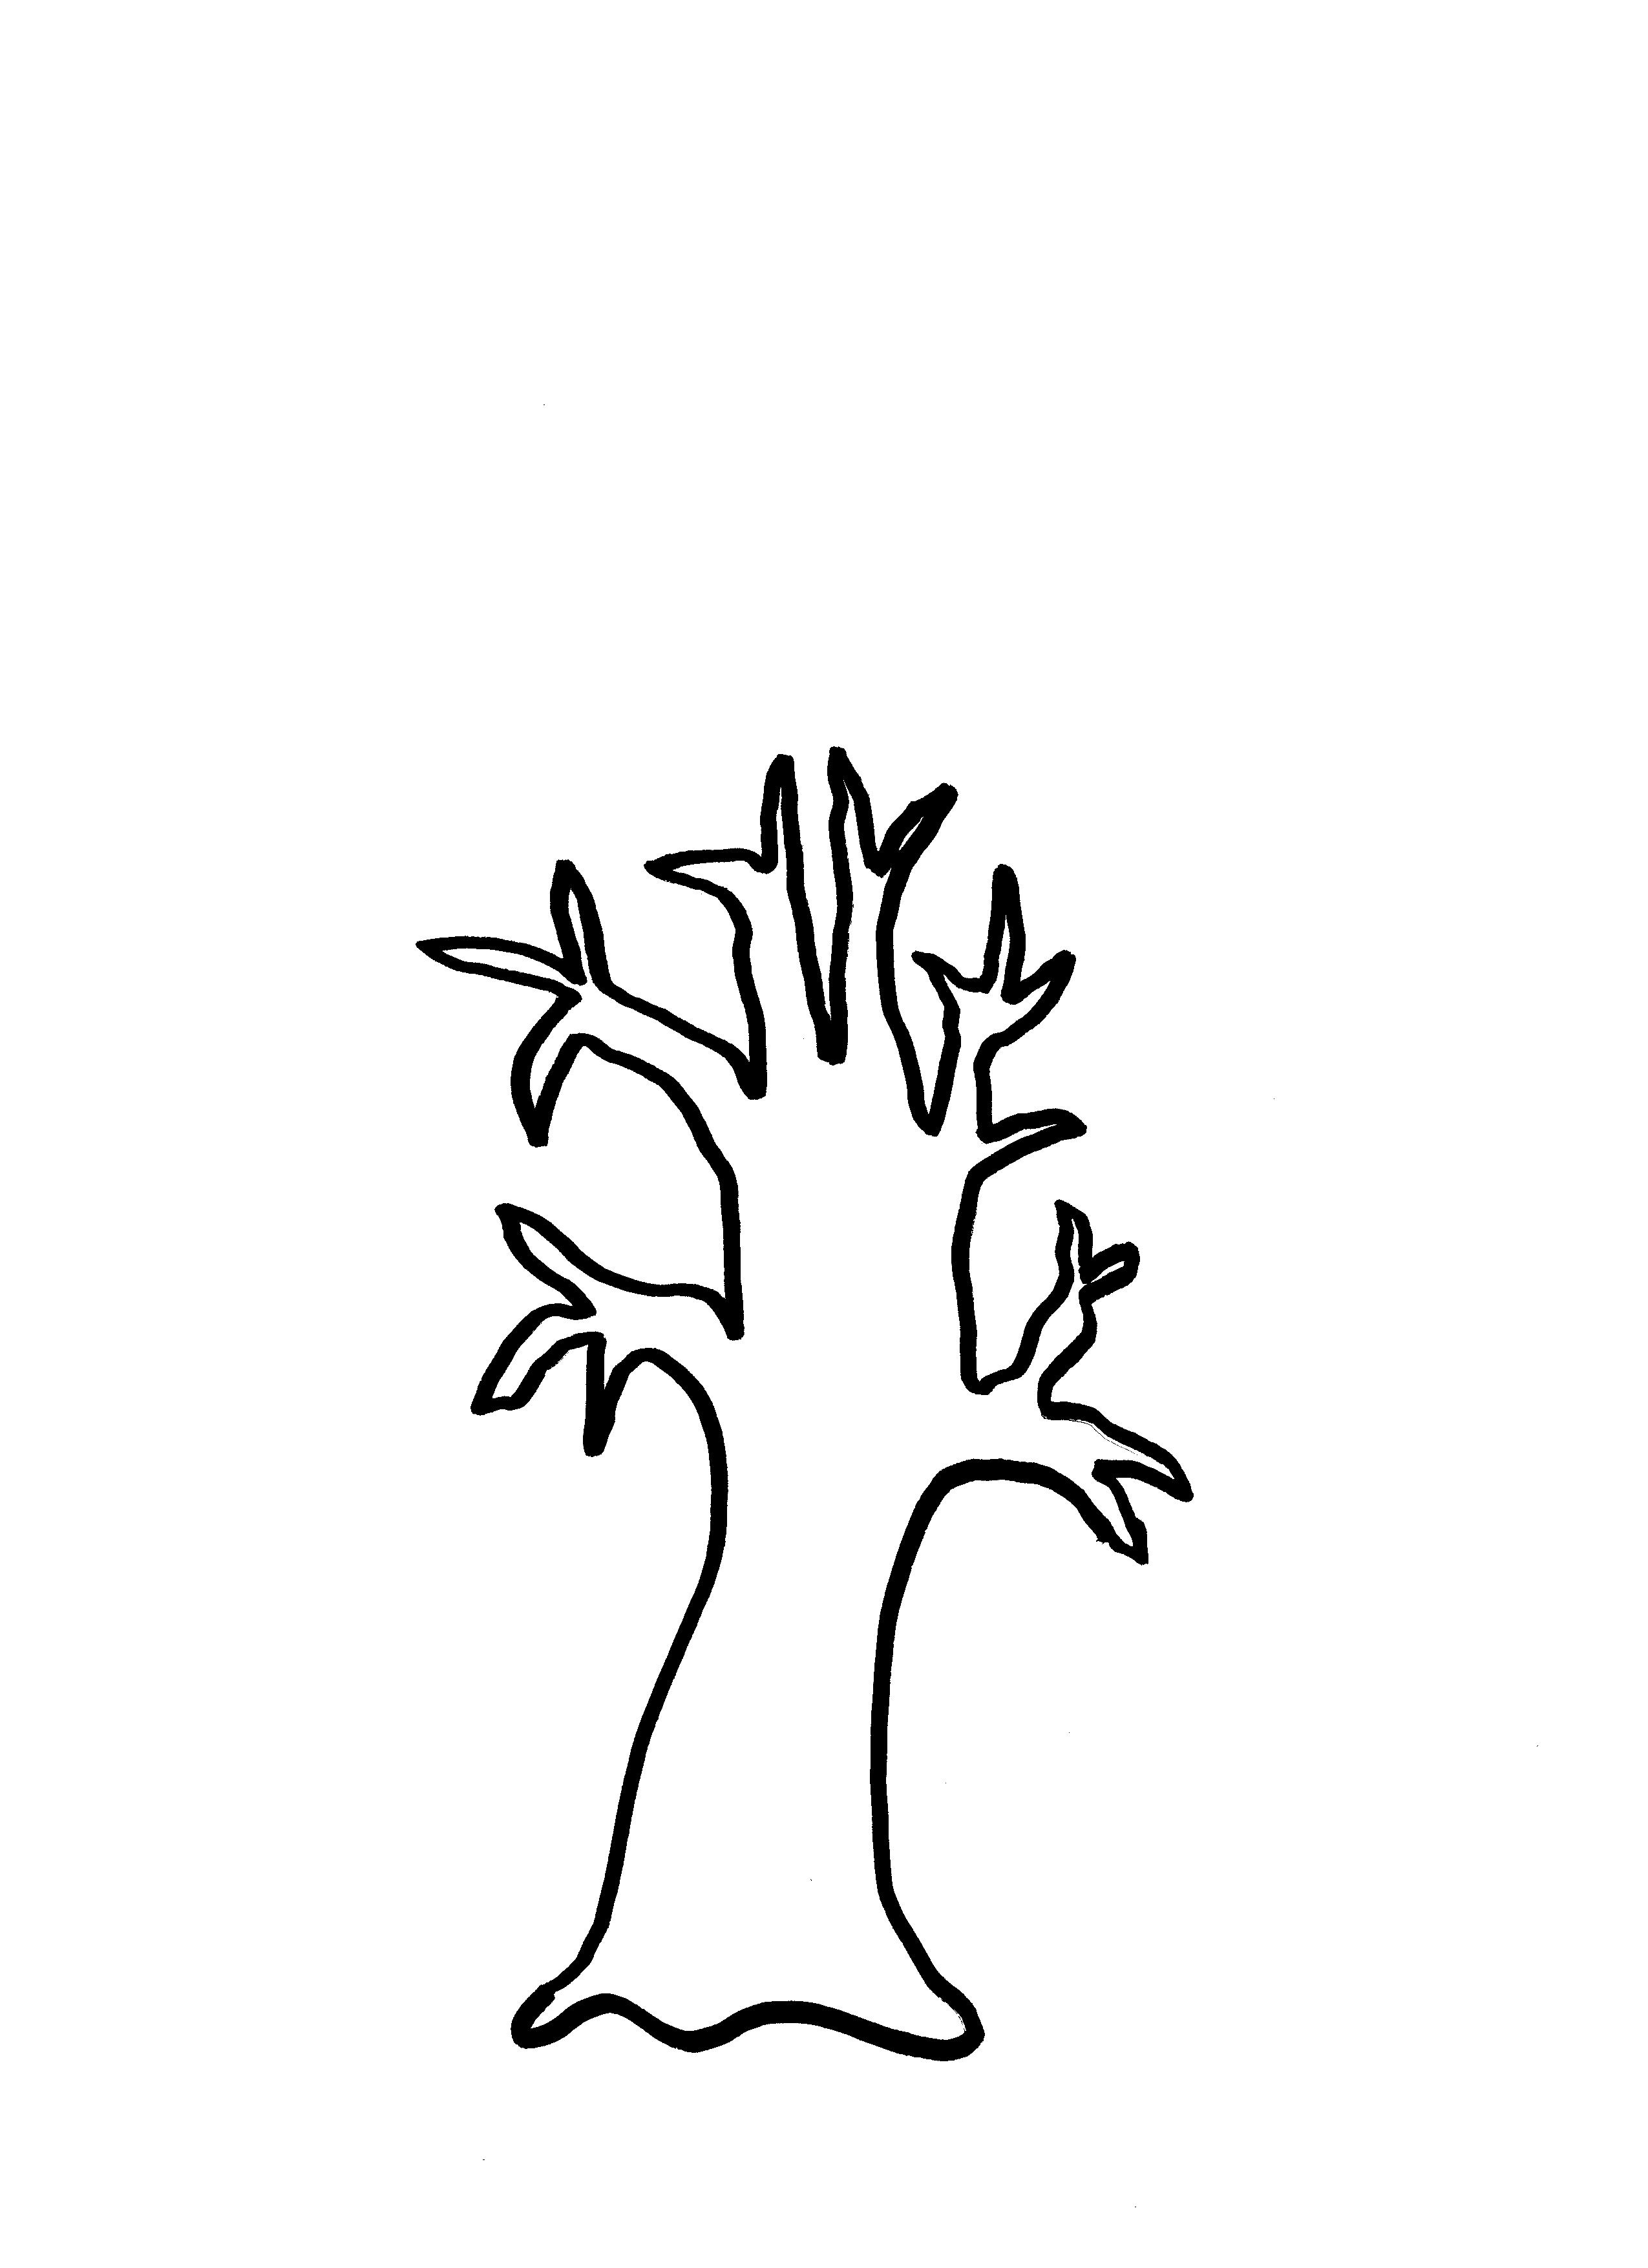 Free Bare Tree Template, Download Free Clip Art, Free Clip Art On - Free Printable Tree Template